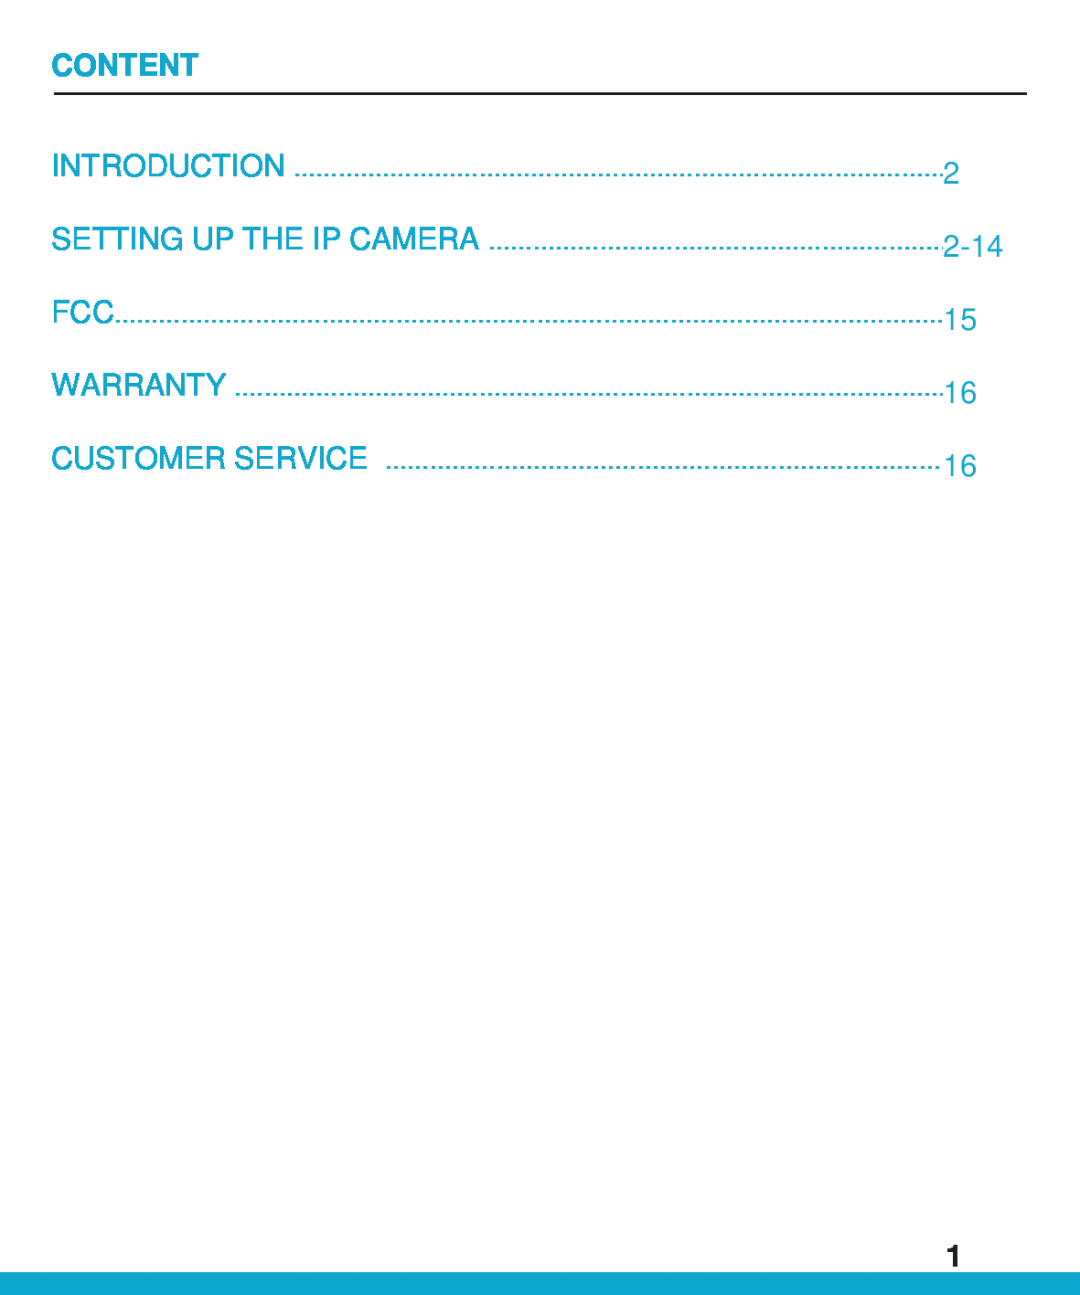 SkyLink wc-400 user manual cONTENT, 2-14, Introduction, Setting Up The Ip Camera, Warranty, Customer Service 